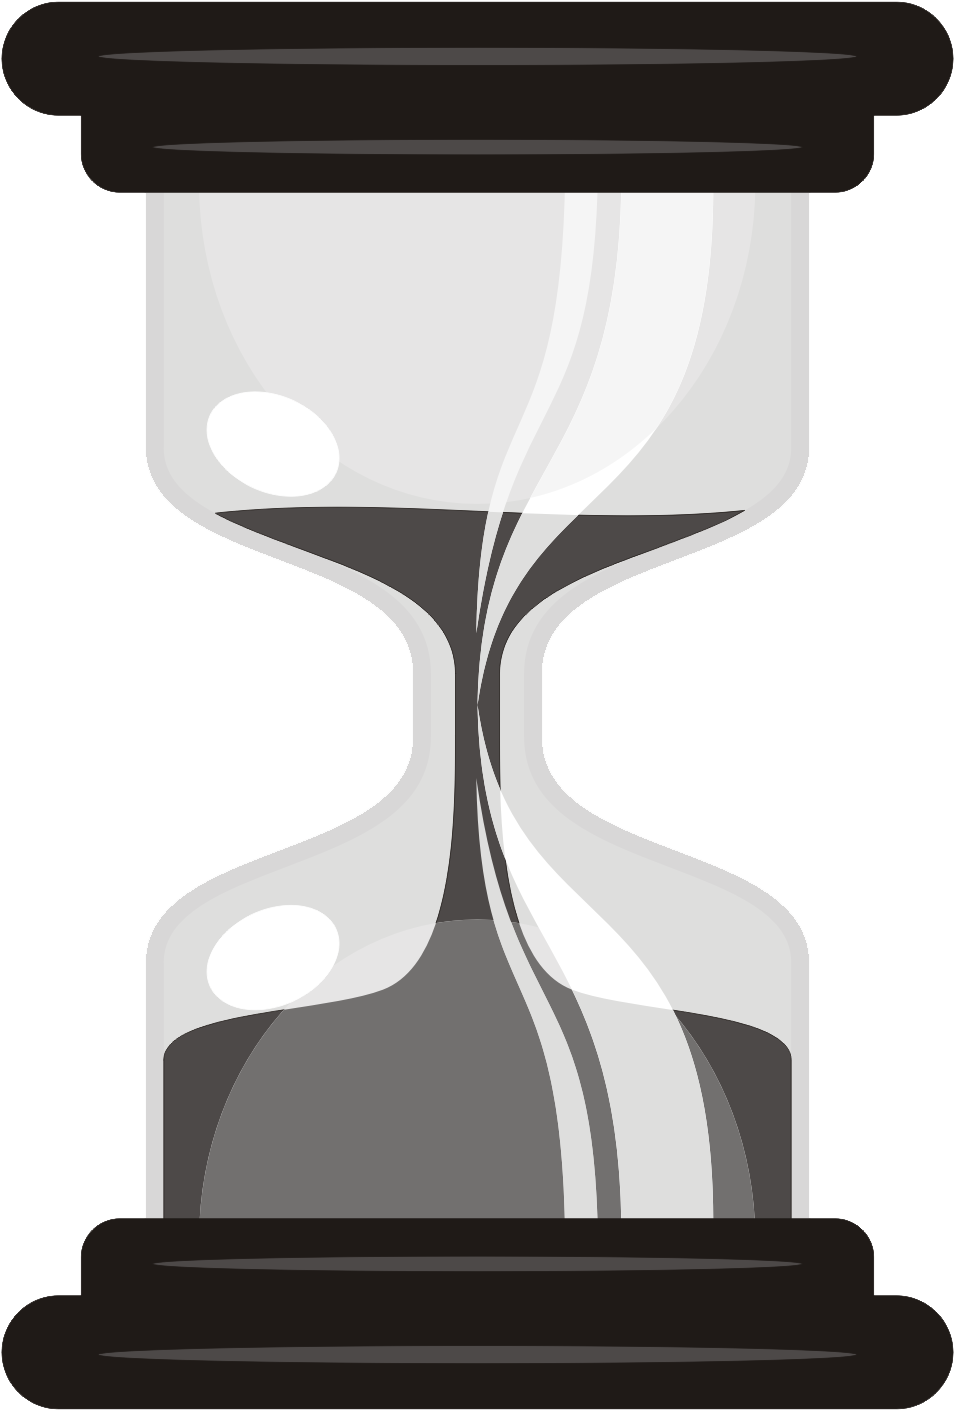 A Hourglass With A Black Background